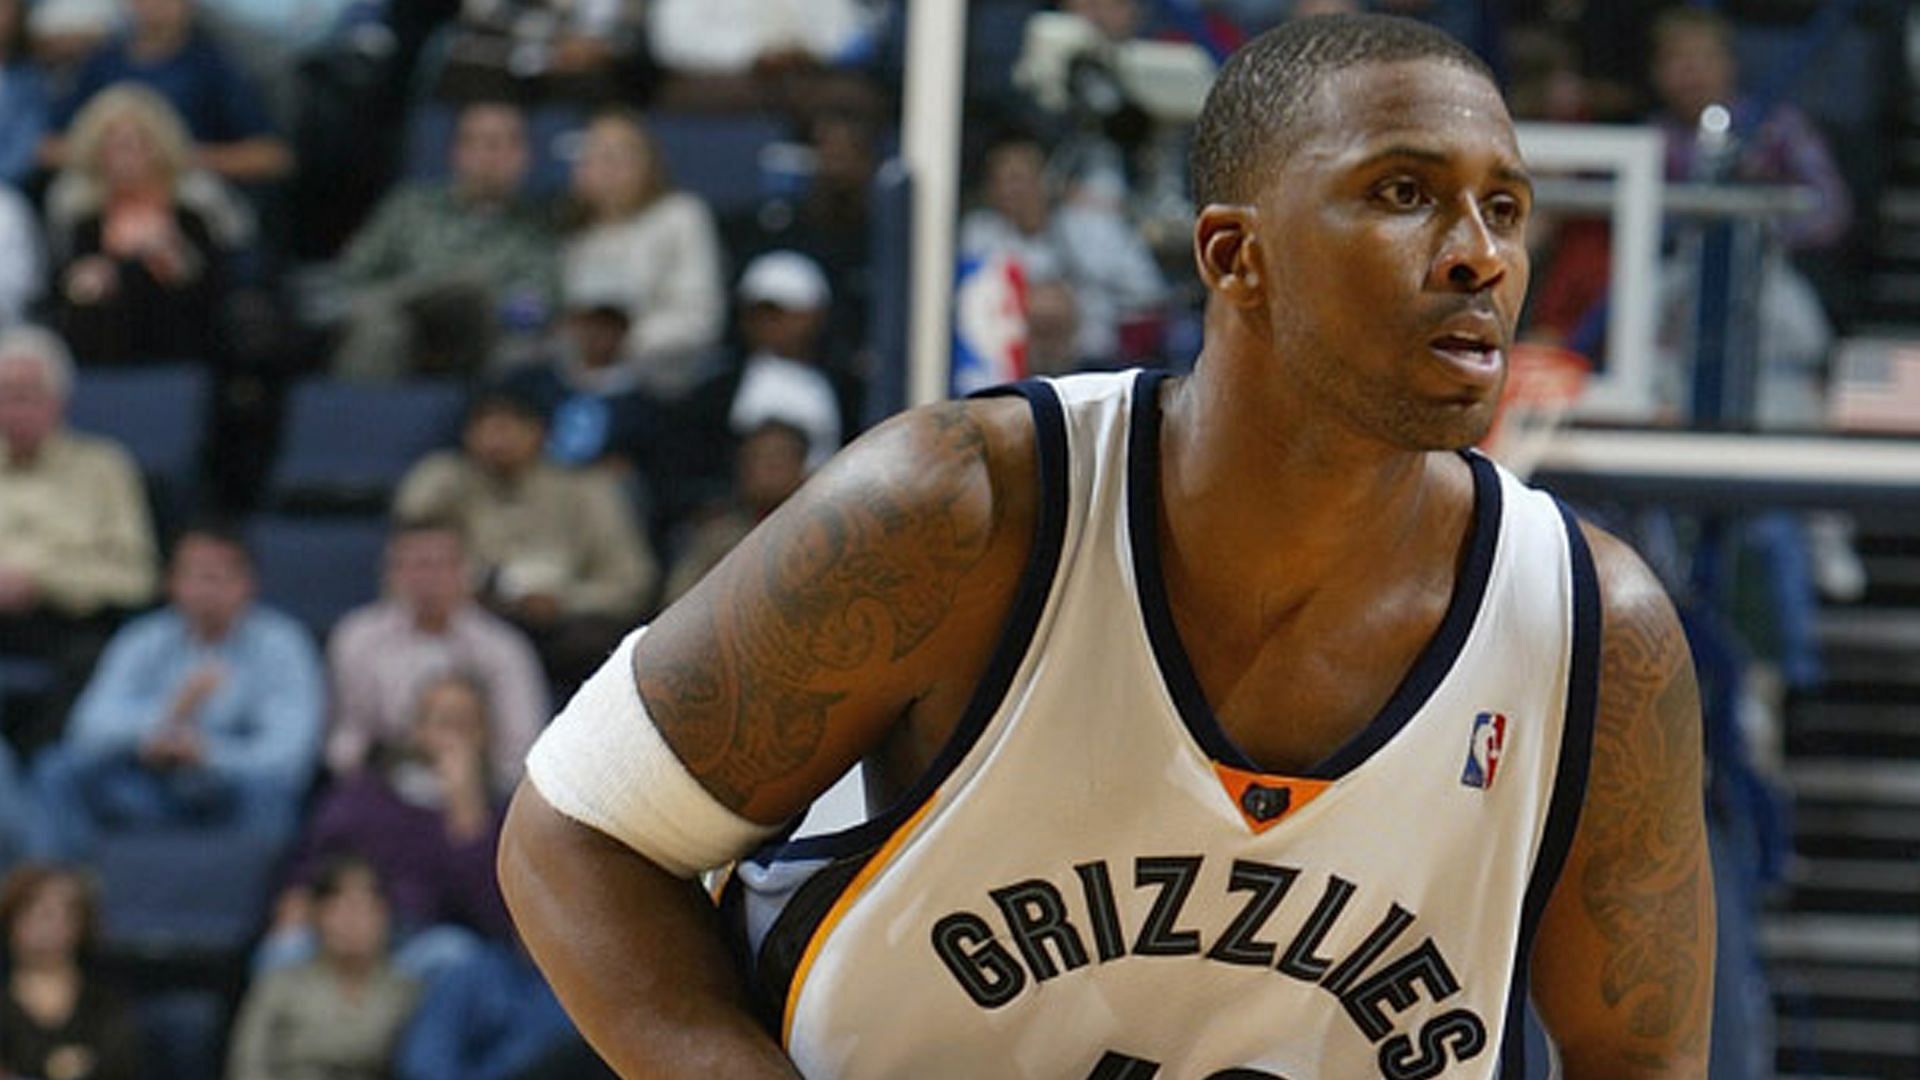 He was a first-round draft pick in the NBA. 14 years later, he was found  dead. Who killed Lorenzen Wright?